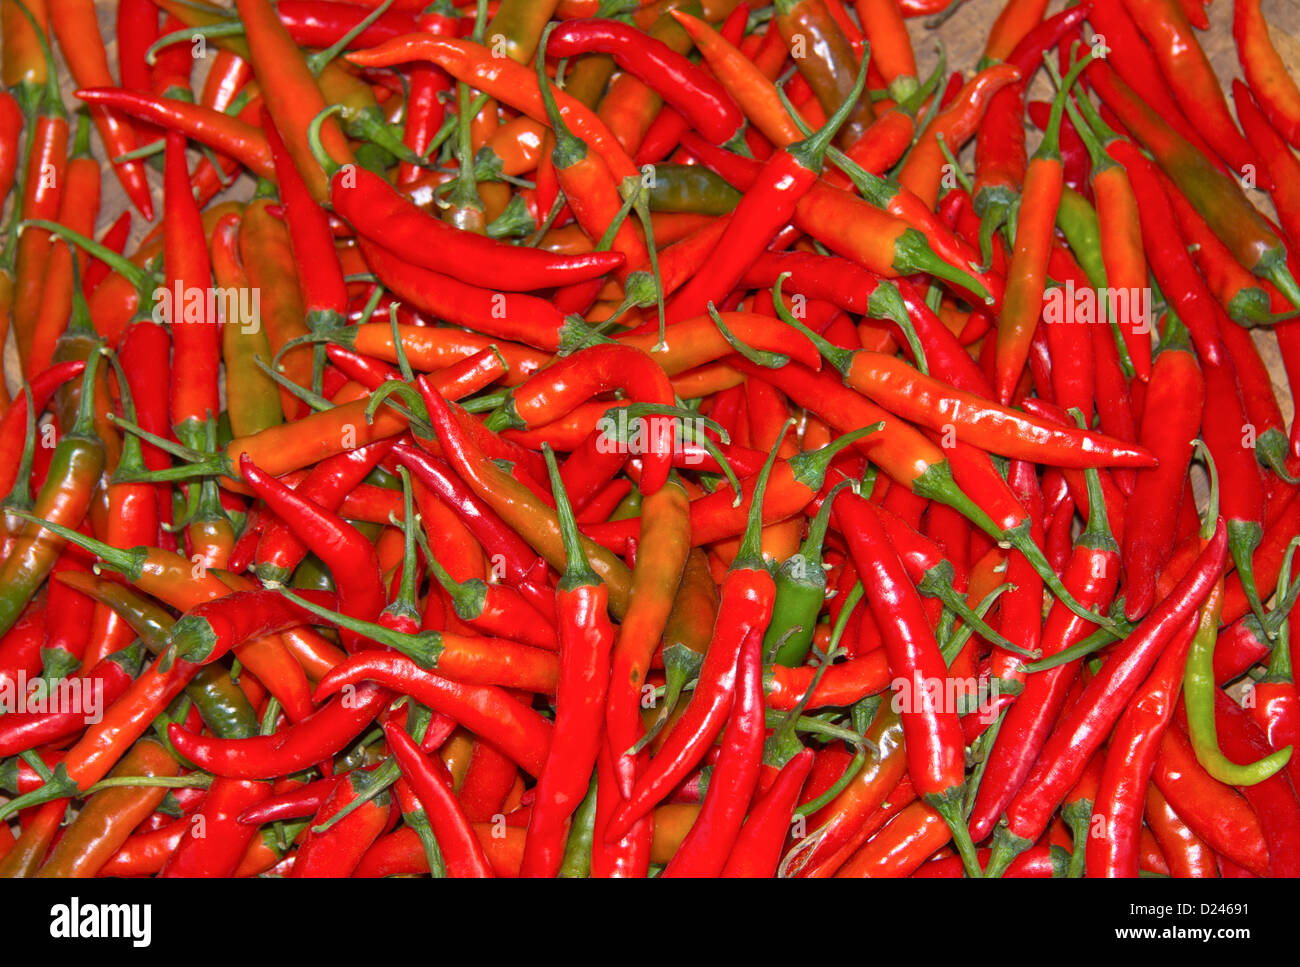 RED HOT CHILLIES FOR SALE MYSORE MARKET INDIA Stock Photo